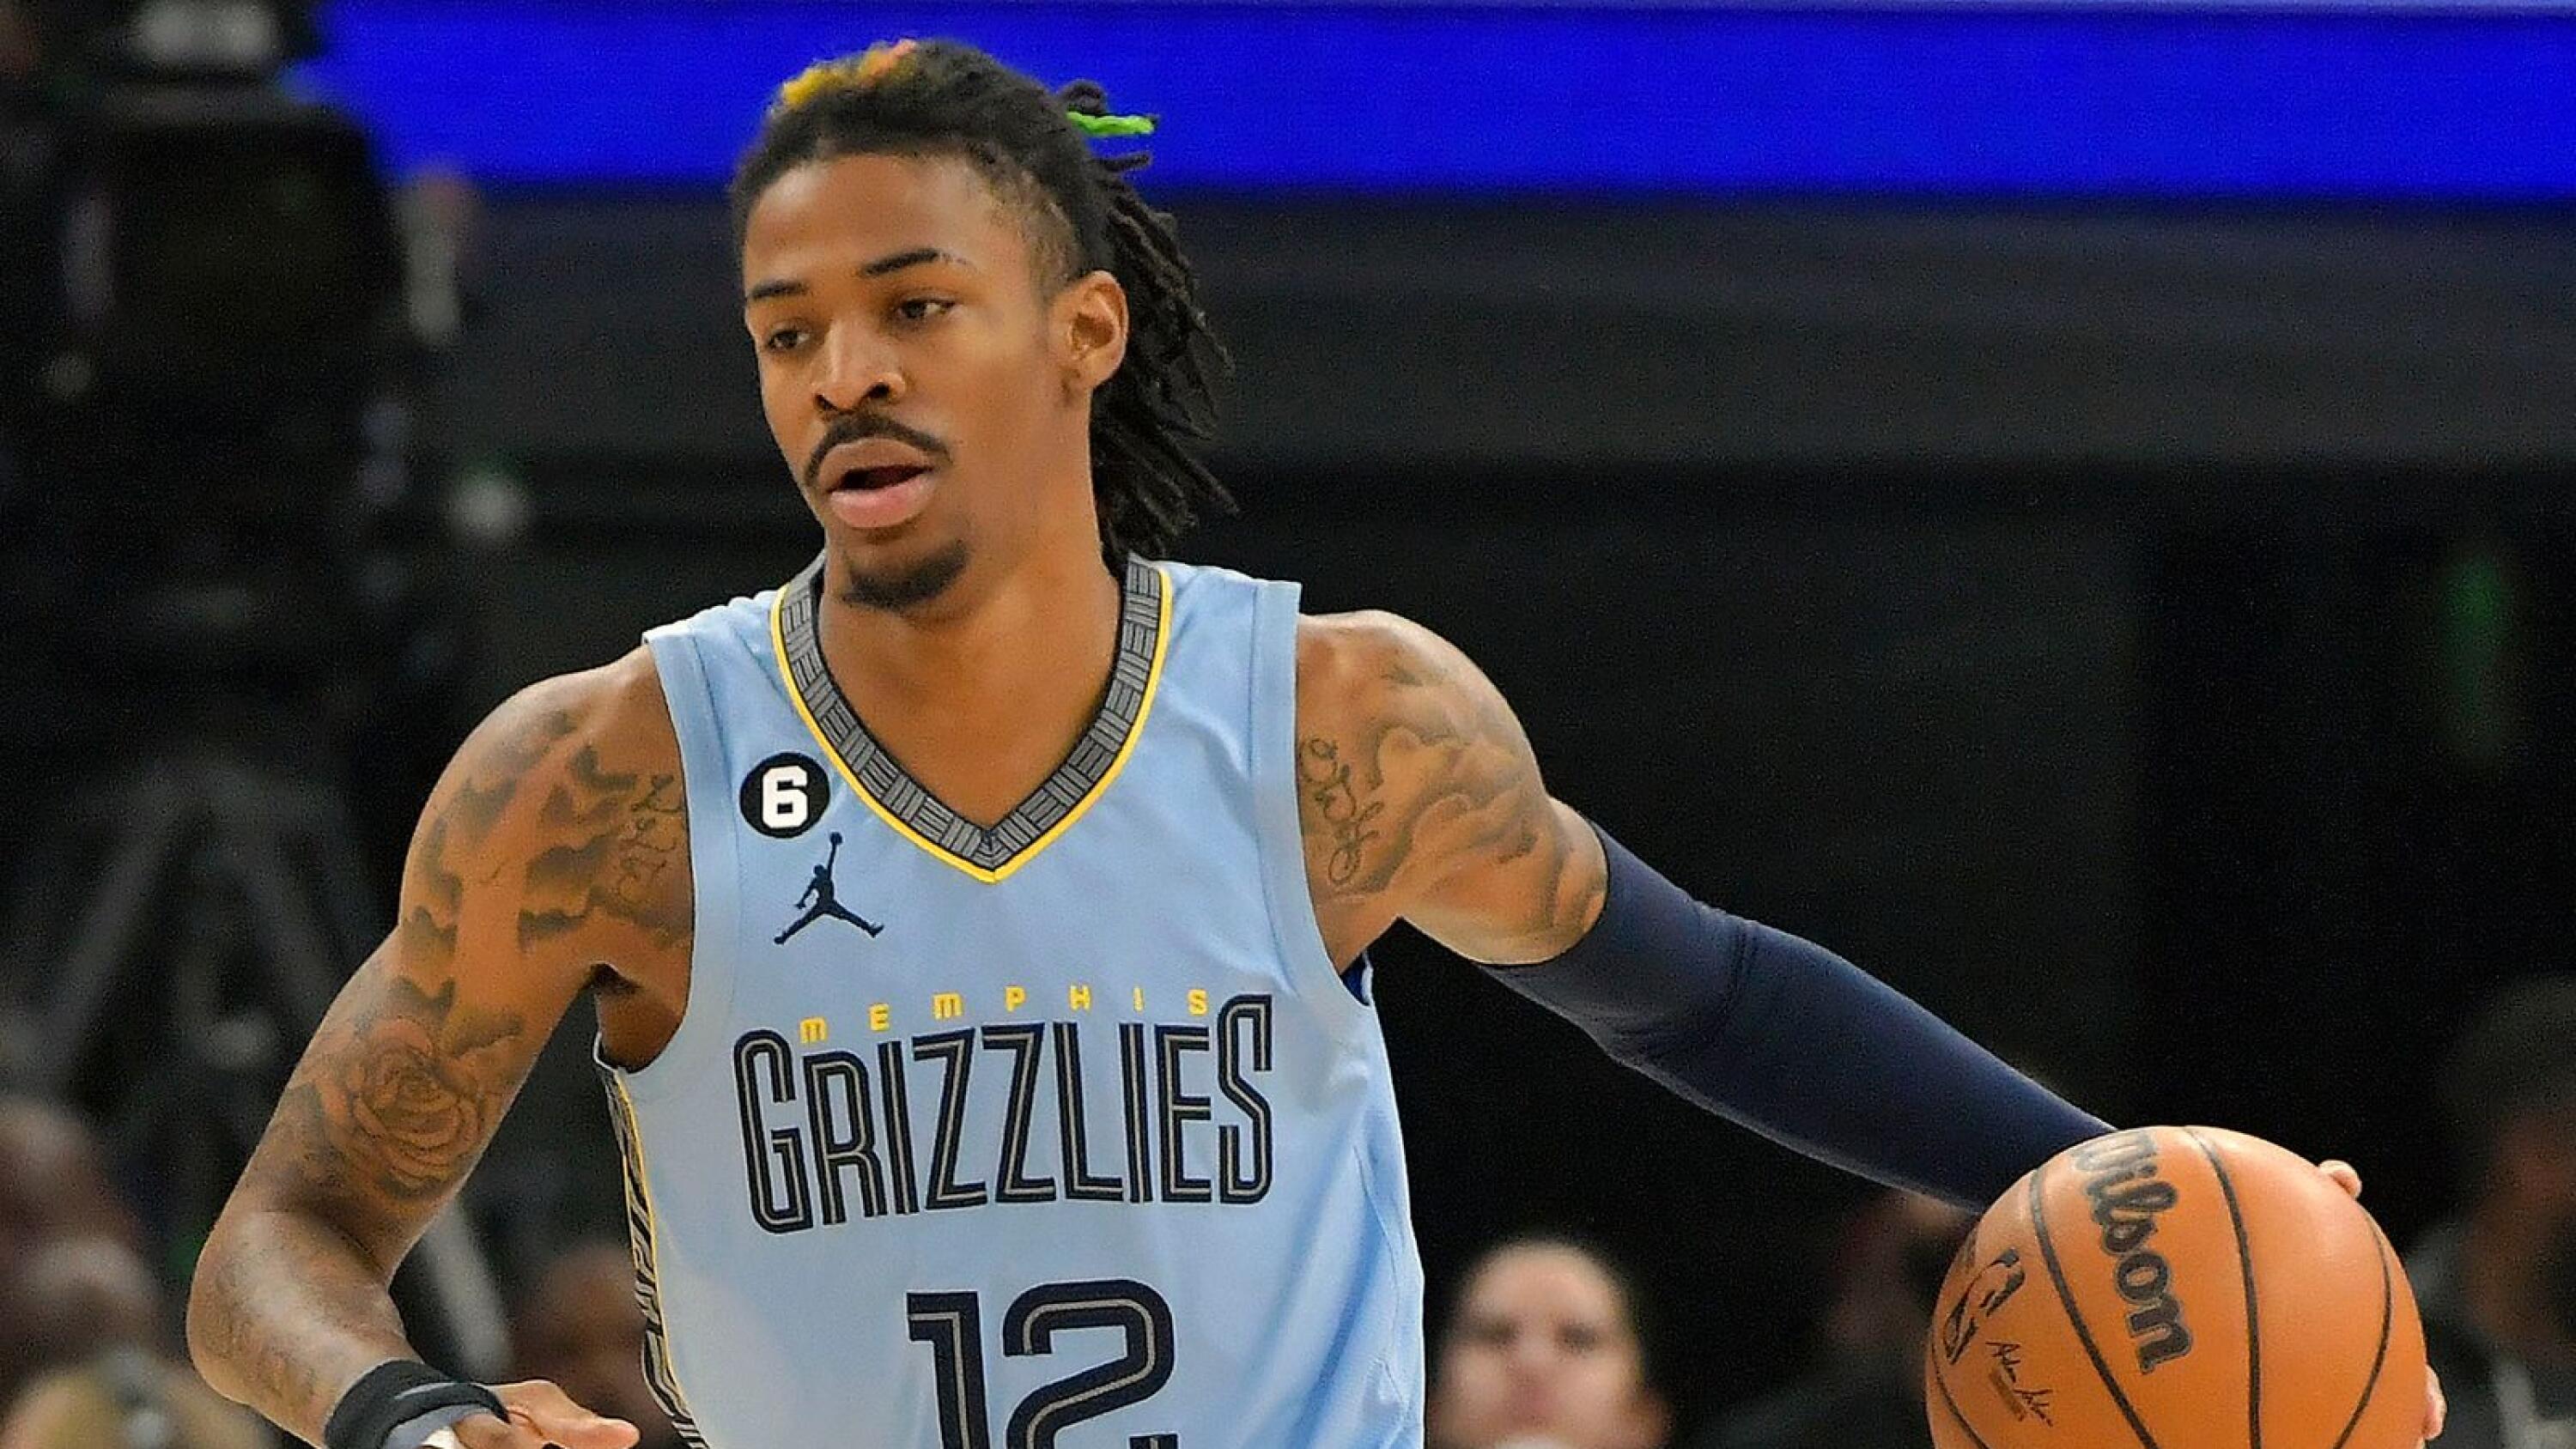 Grizzlies' Ja Morant responds after second video appearing to hold gun:  'Continuing to work on myself